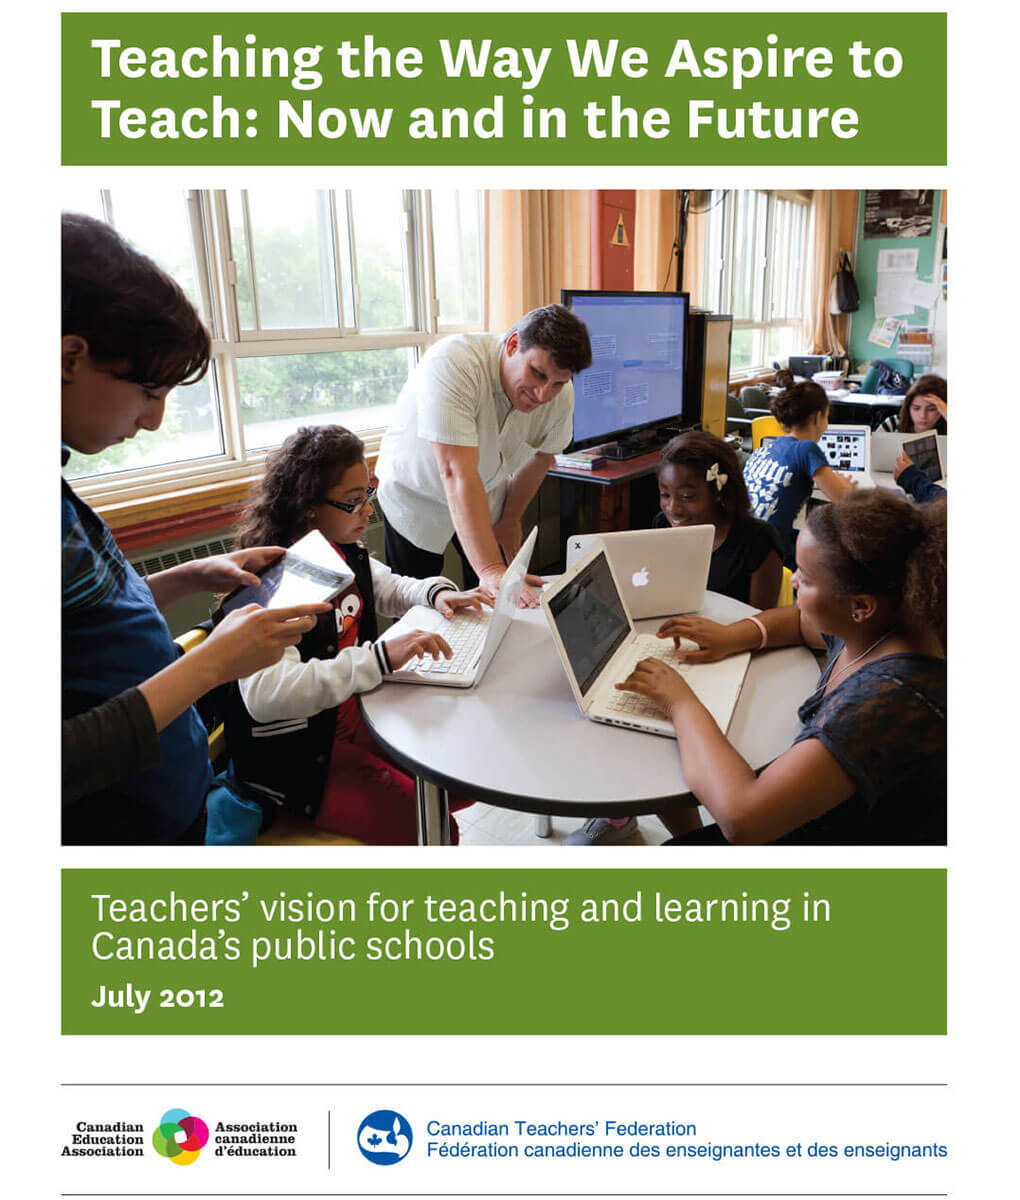 Teaching the Way We Aspire to Teach: Now and in the Future